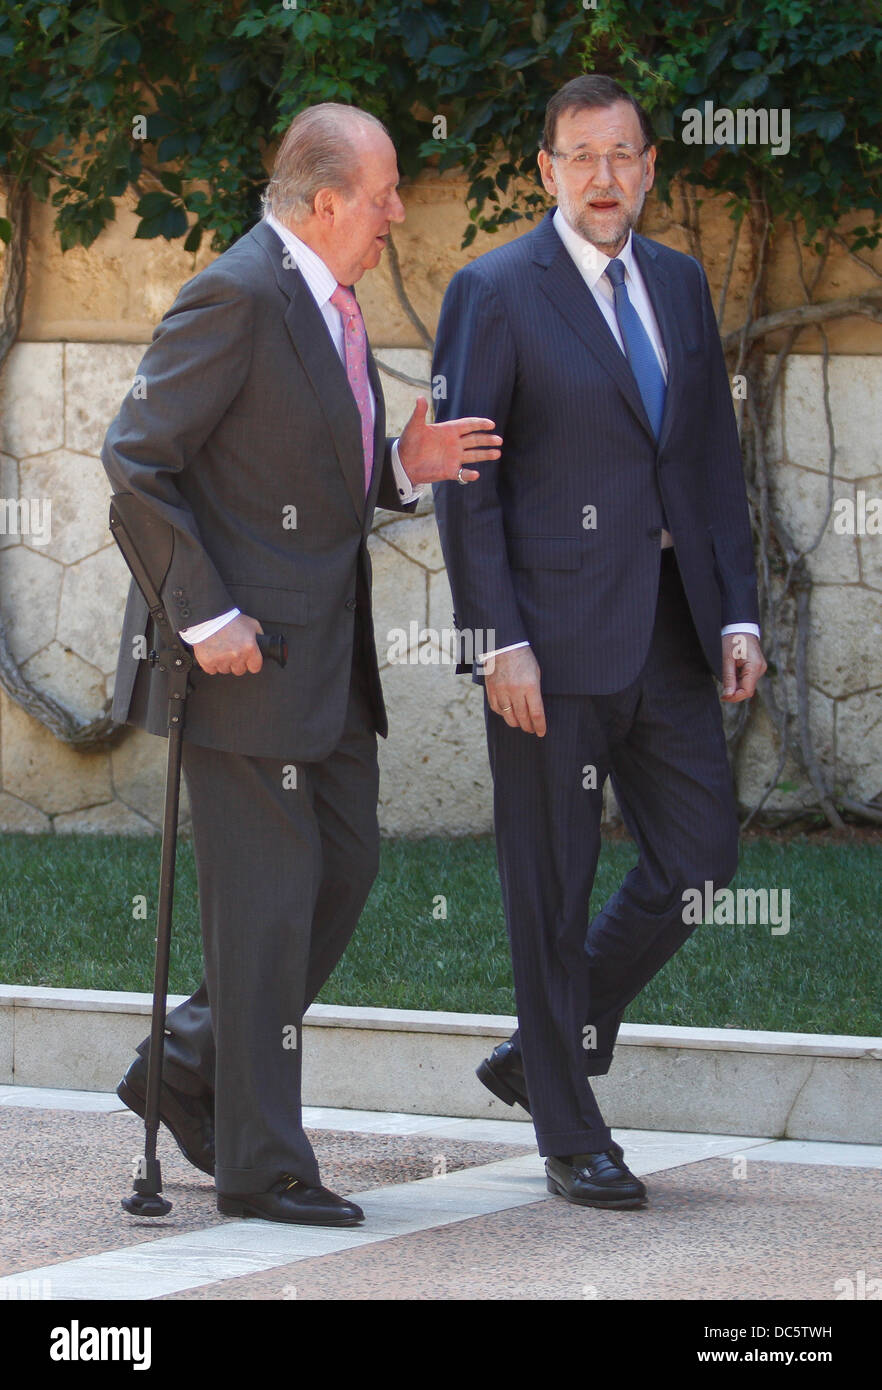 Mallorca, Spain. 9th August 2013. Spanish King Juan Carlos (right) and Prime minister Mariano Rajoy talk before a meeting at Marivent Palace in the Spanish island of Mallorca, on 9th August, 2013. Problems such as recent Gibraltar crisis between Spain and United Kingdom or social problems have been treated during this summer meeting. Credit:  zixia/Alamy Live News Stock Photo